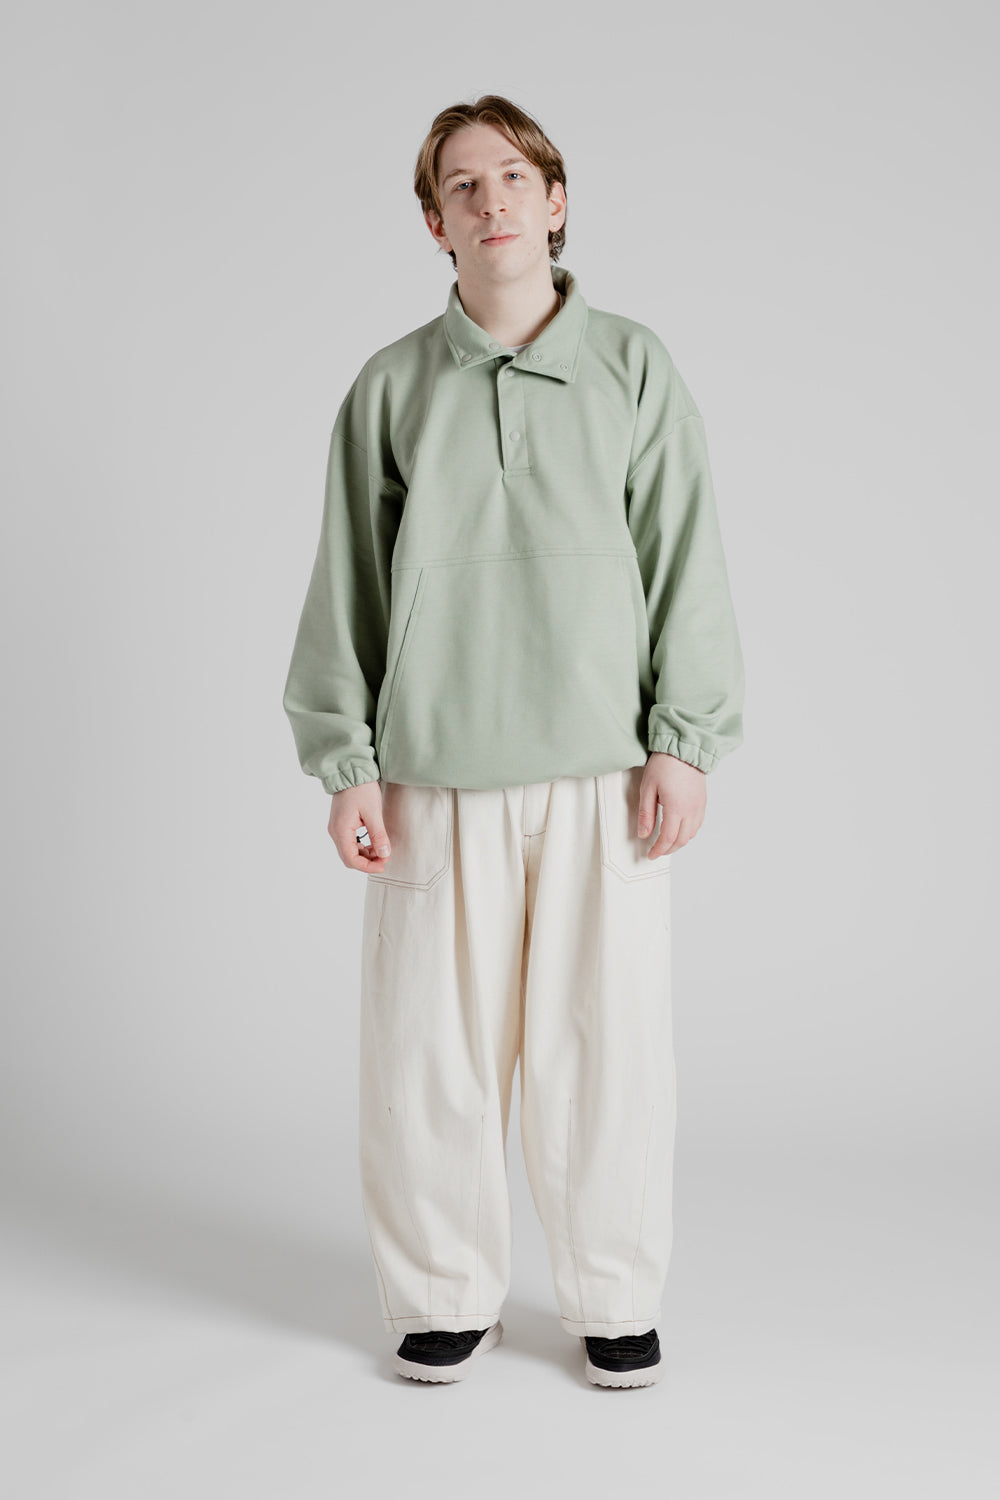 Wool-Cashmere Balloon Pants - Men - OBSOLETES DO NOT TOUCH